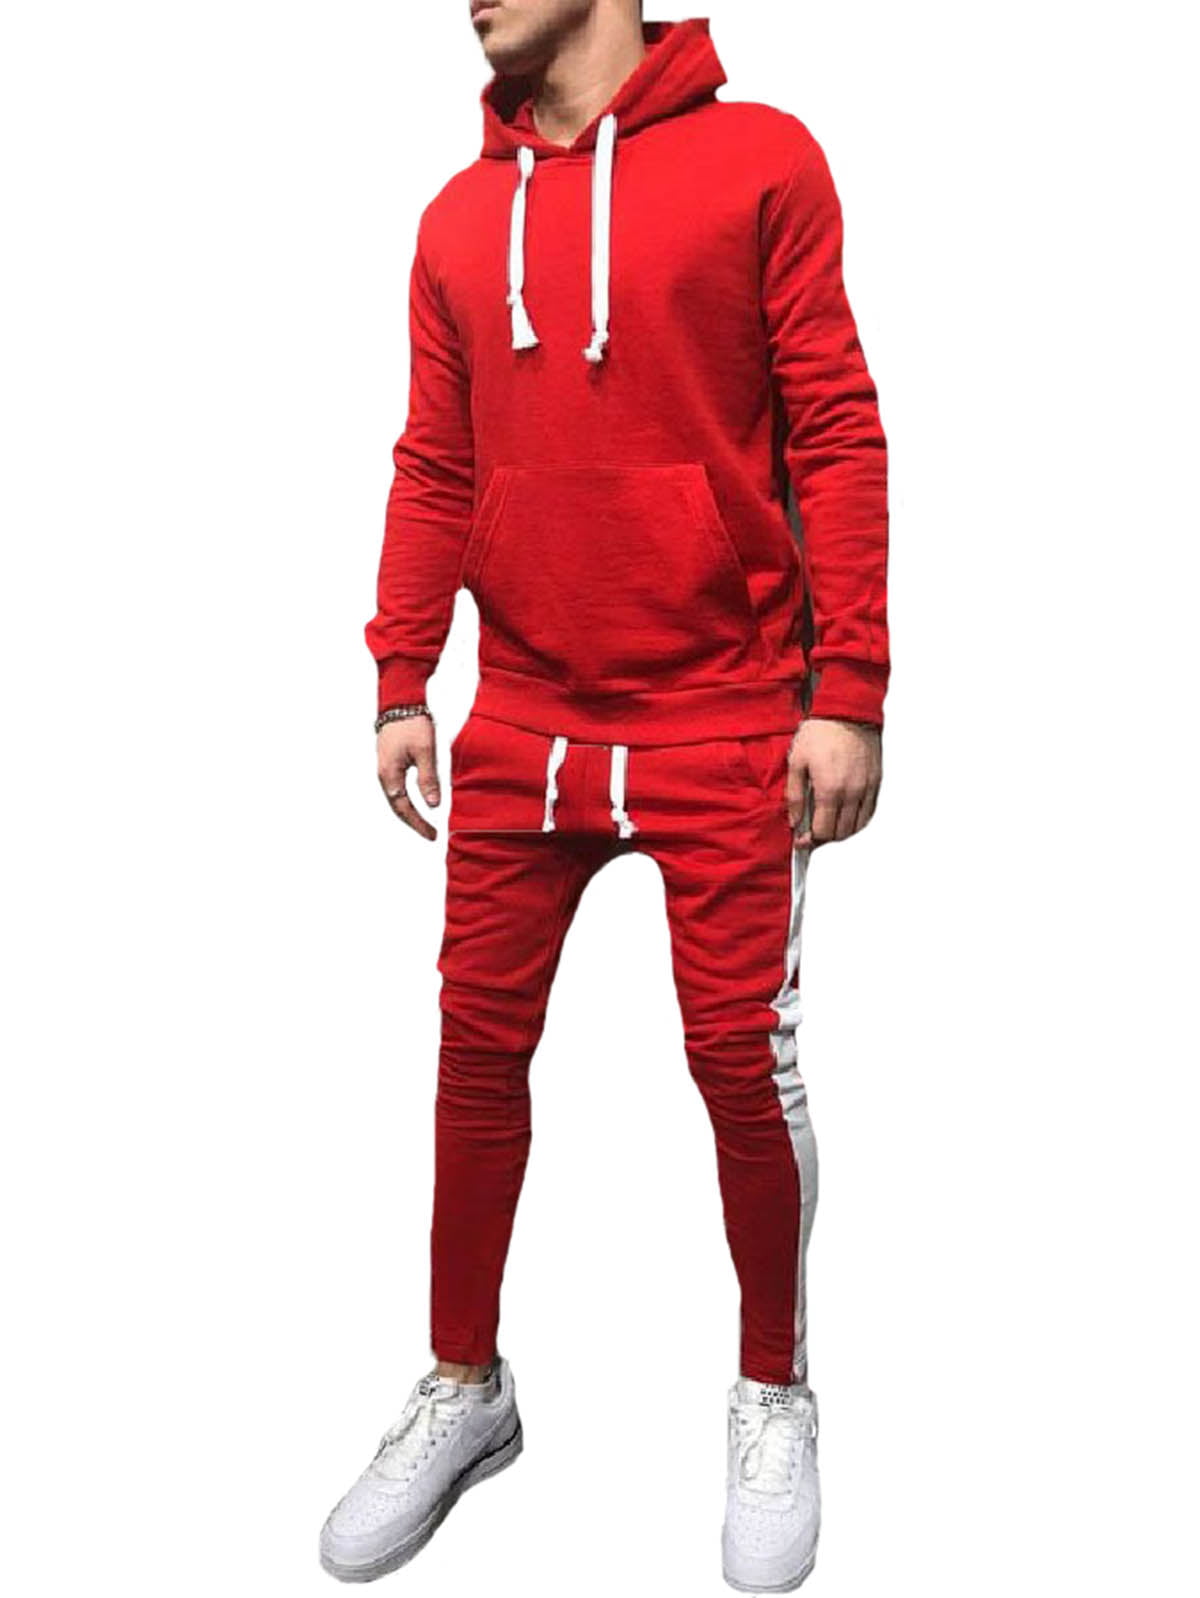 Mens Gym Contrast Jogging Full Tracksuit Hoodies Polyester Joggers Set 